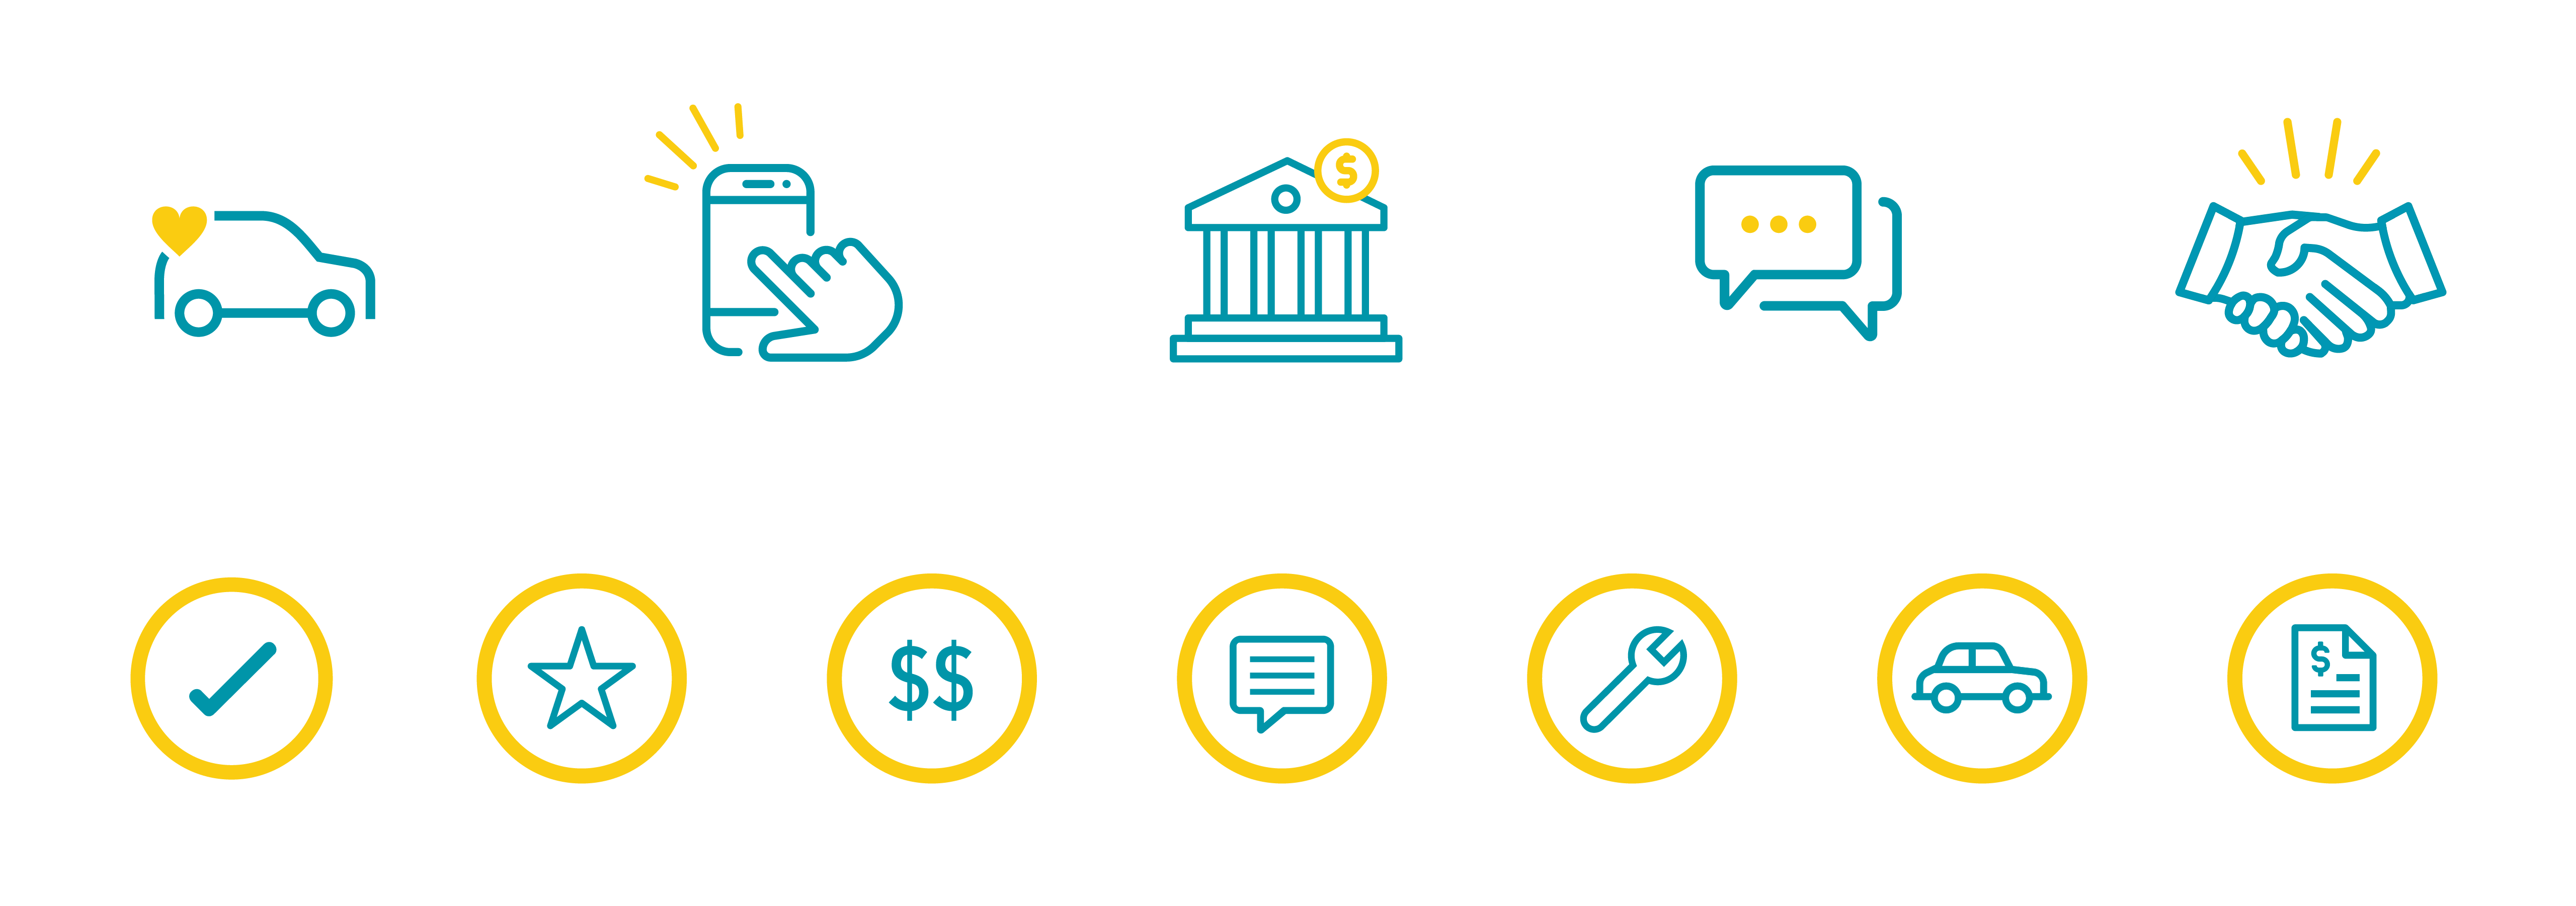 A sample set of icons of a variety of financial and auto topics